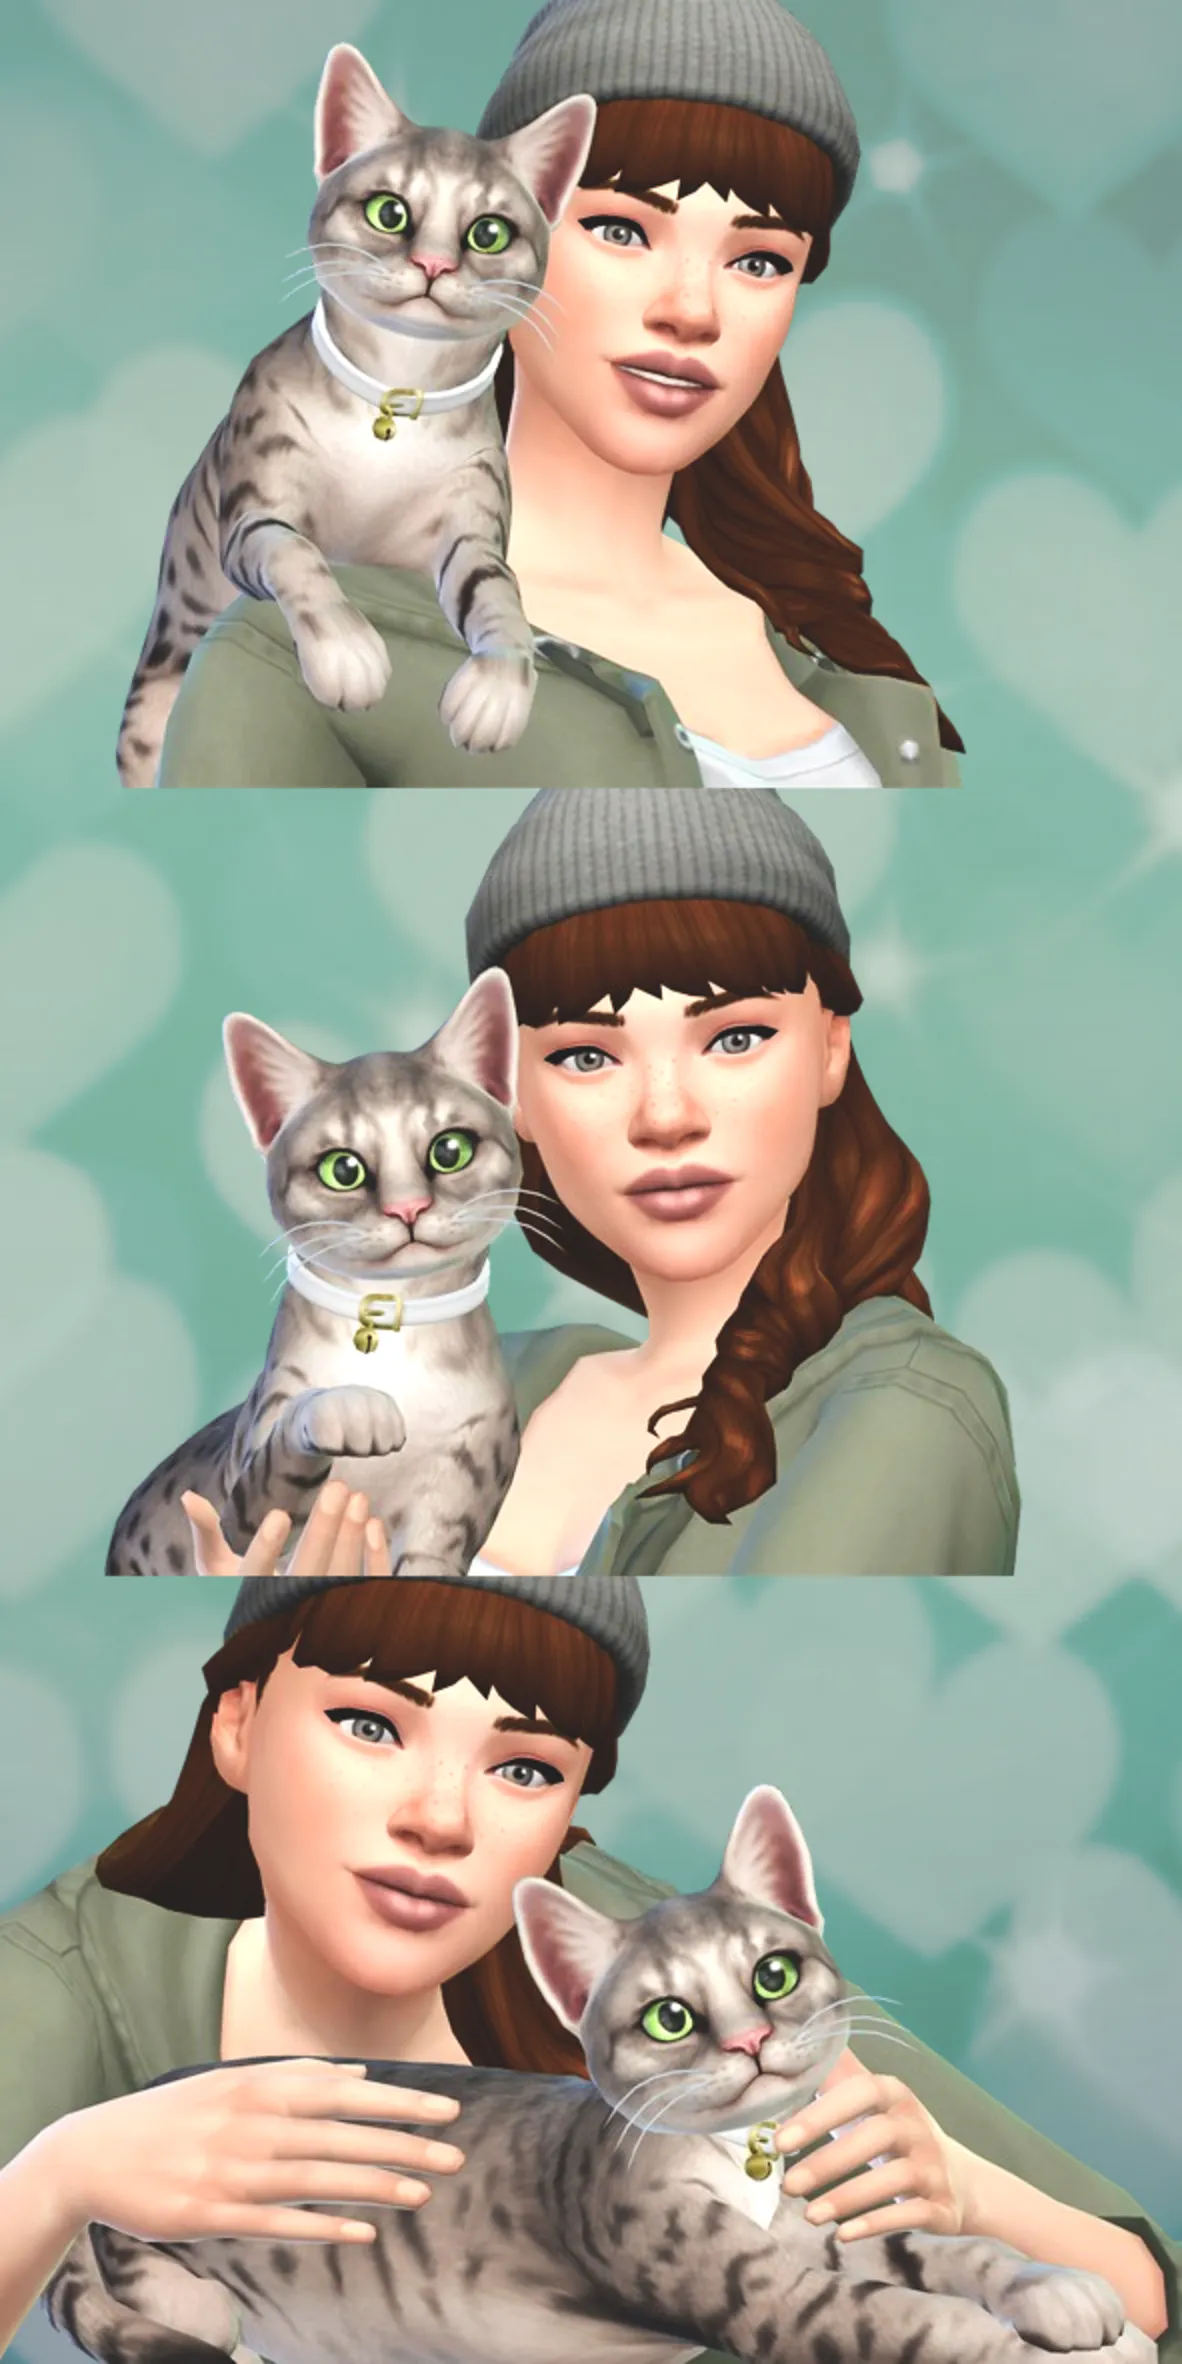 My Feline Friend 🐱 Pose Pack for the TS4 Gallery